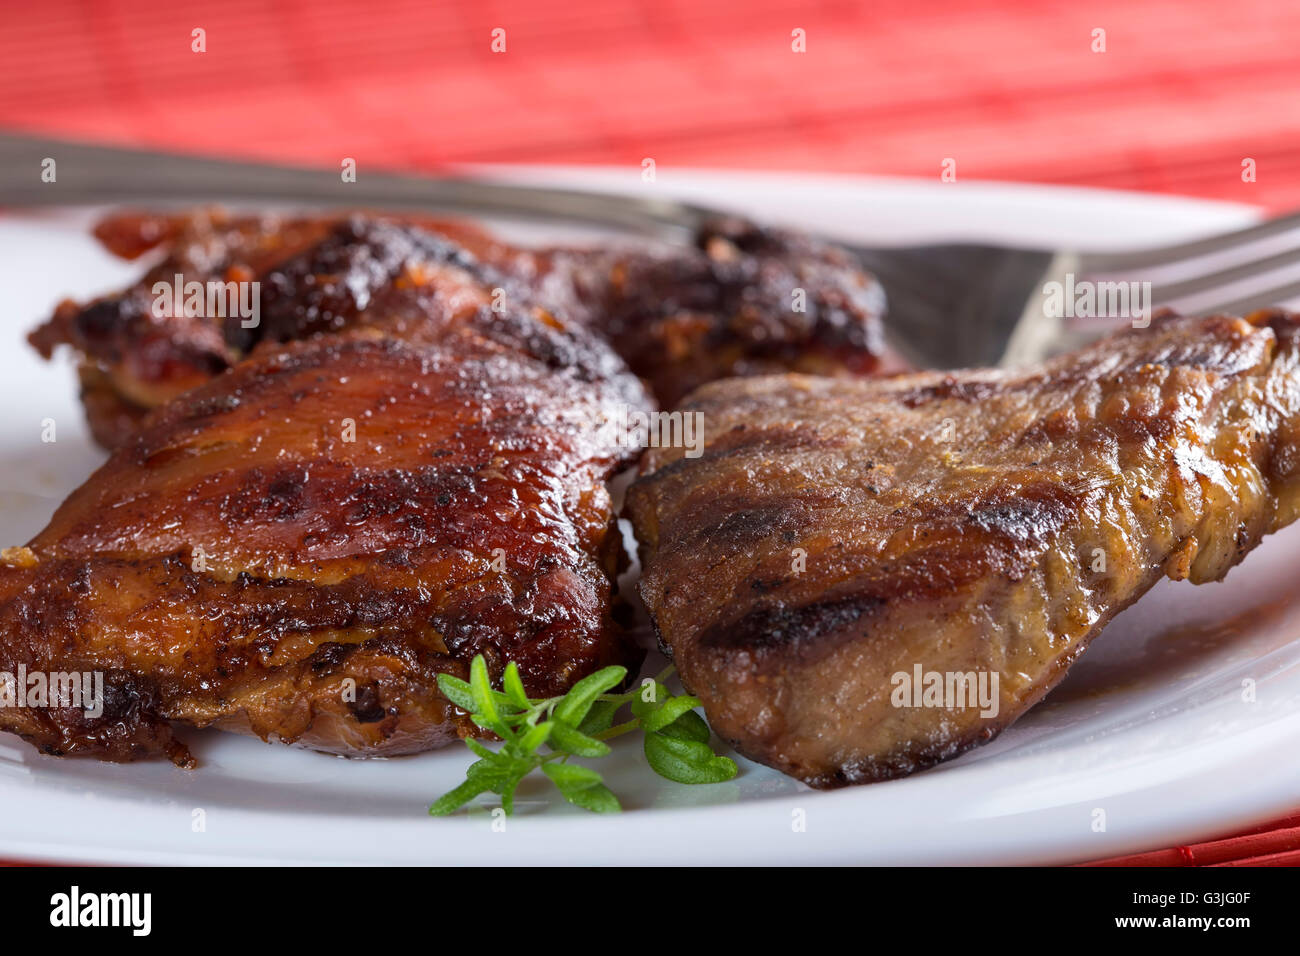 One serving of pork chop on white plate with fork Stock Photo